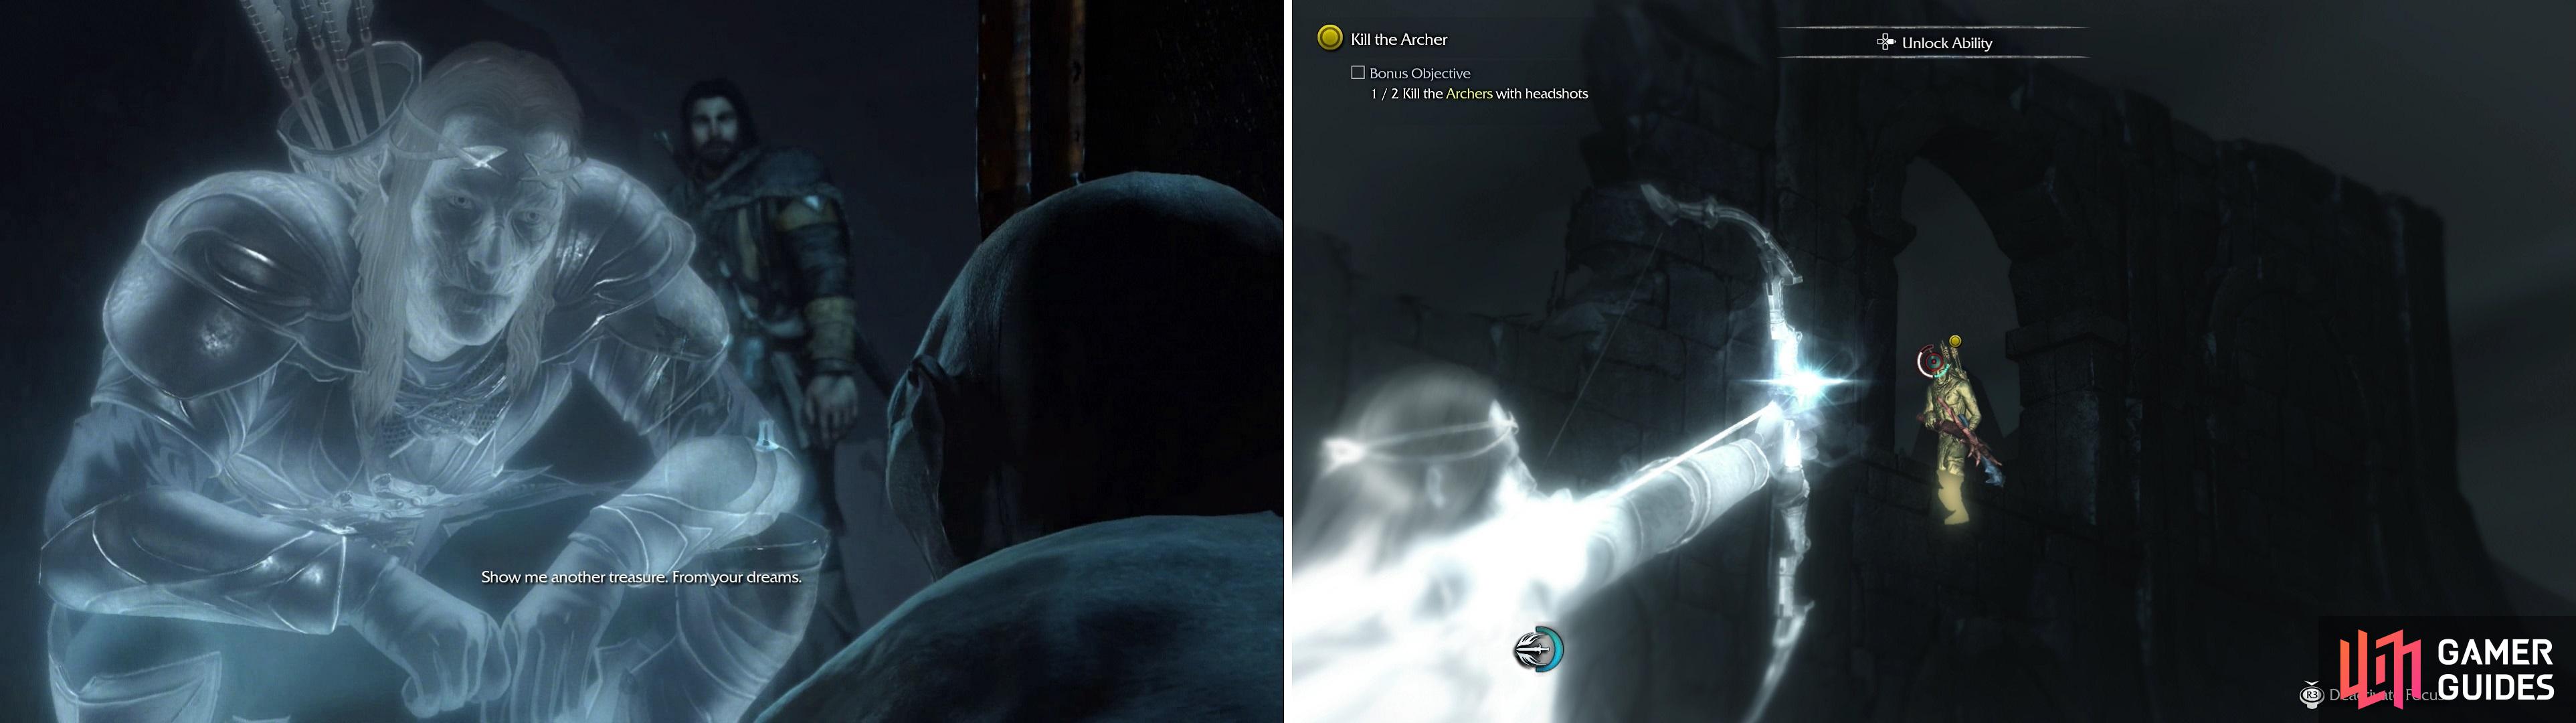 Despite Talion’s rudeness, the Wraith manages to persuade Gollum into leading us to another relic (left). Along the way, headshot a few Uruk archers to complete a bonus objective (right).